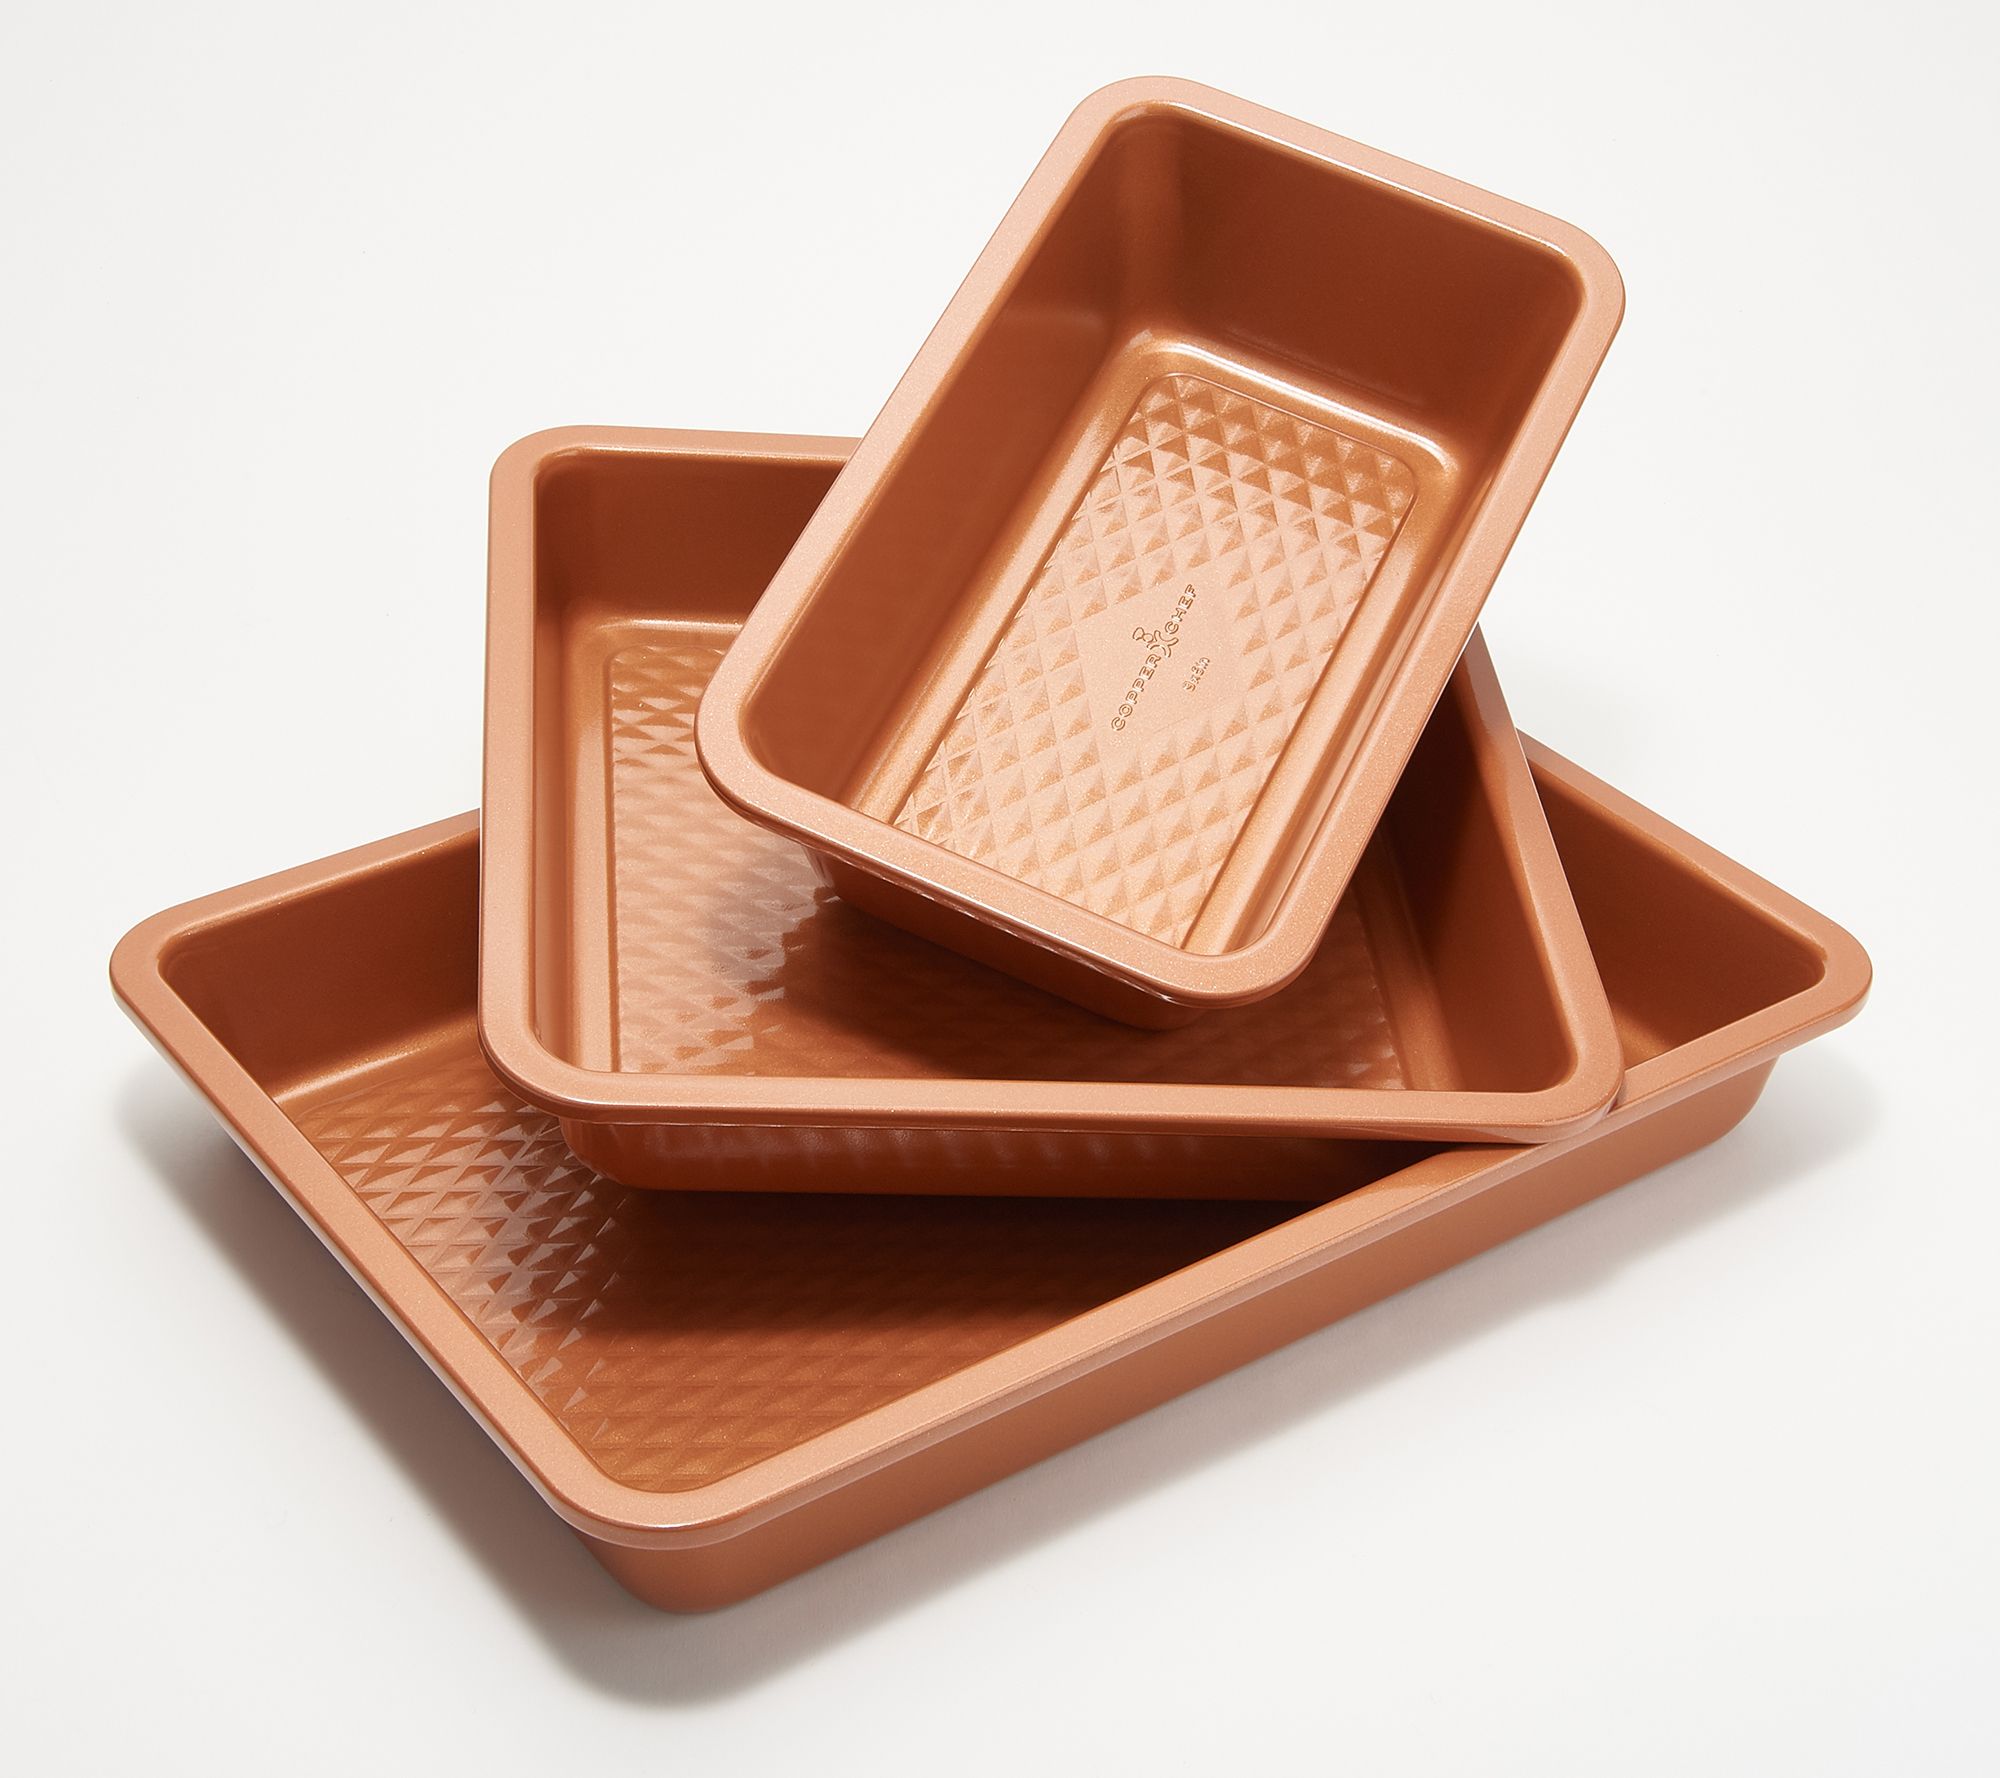 Copper Chef Diamond Bakeware 2-Pack Baking Tray Cookie Sheet Set